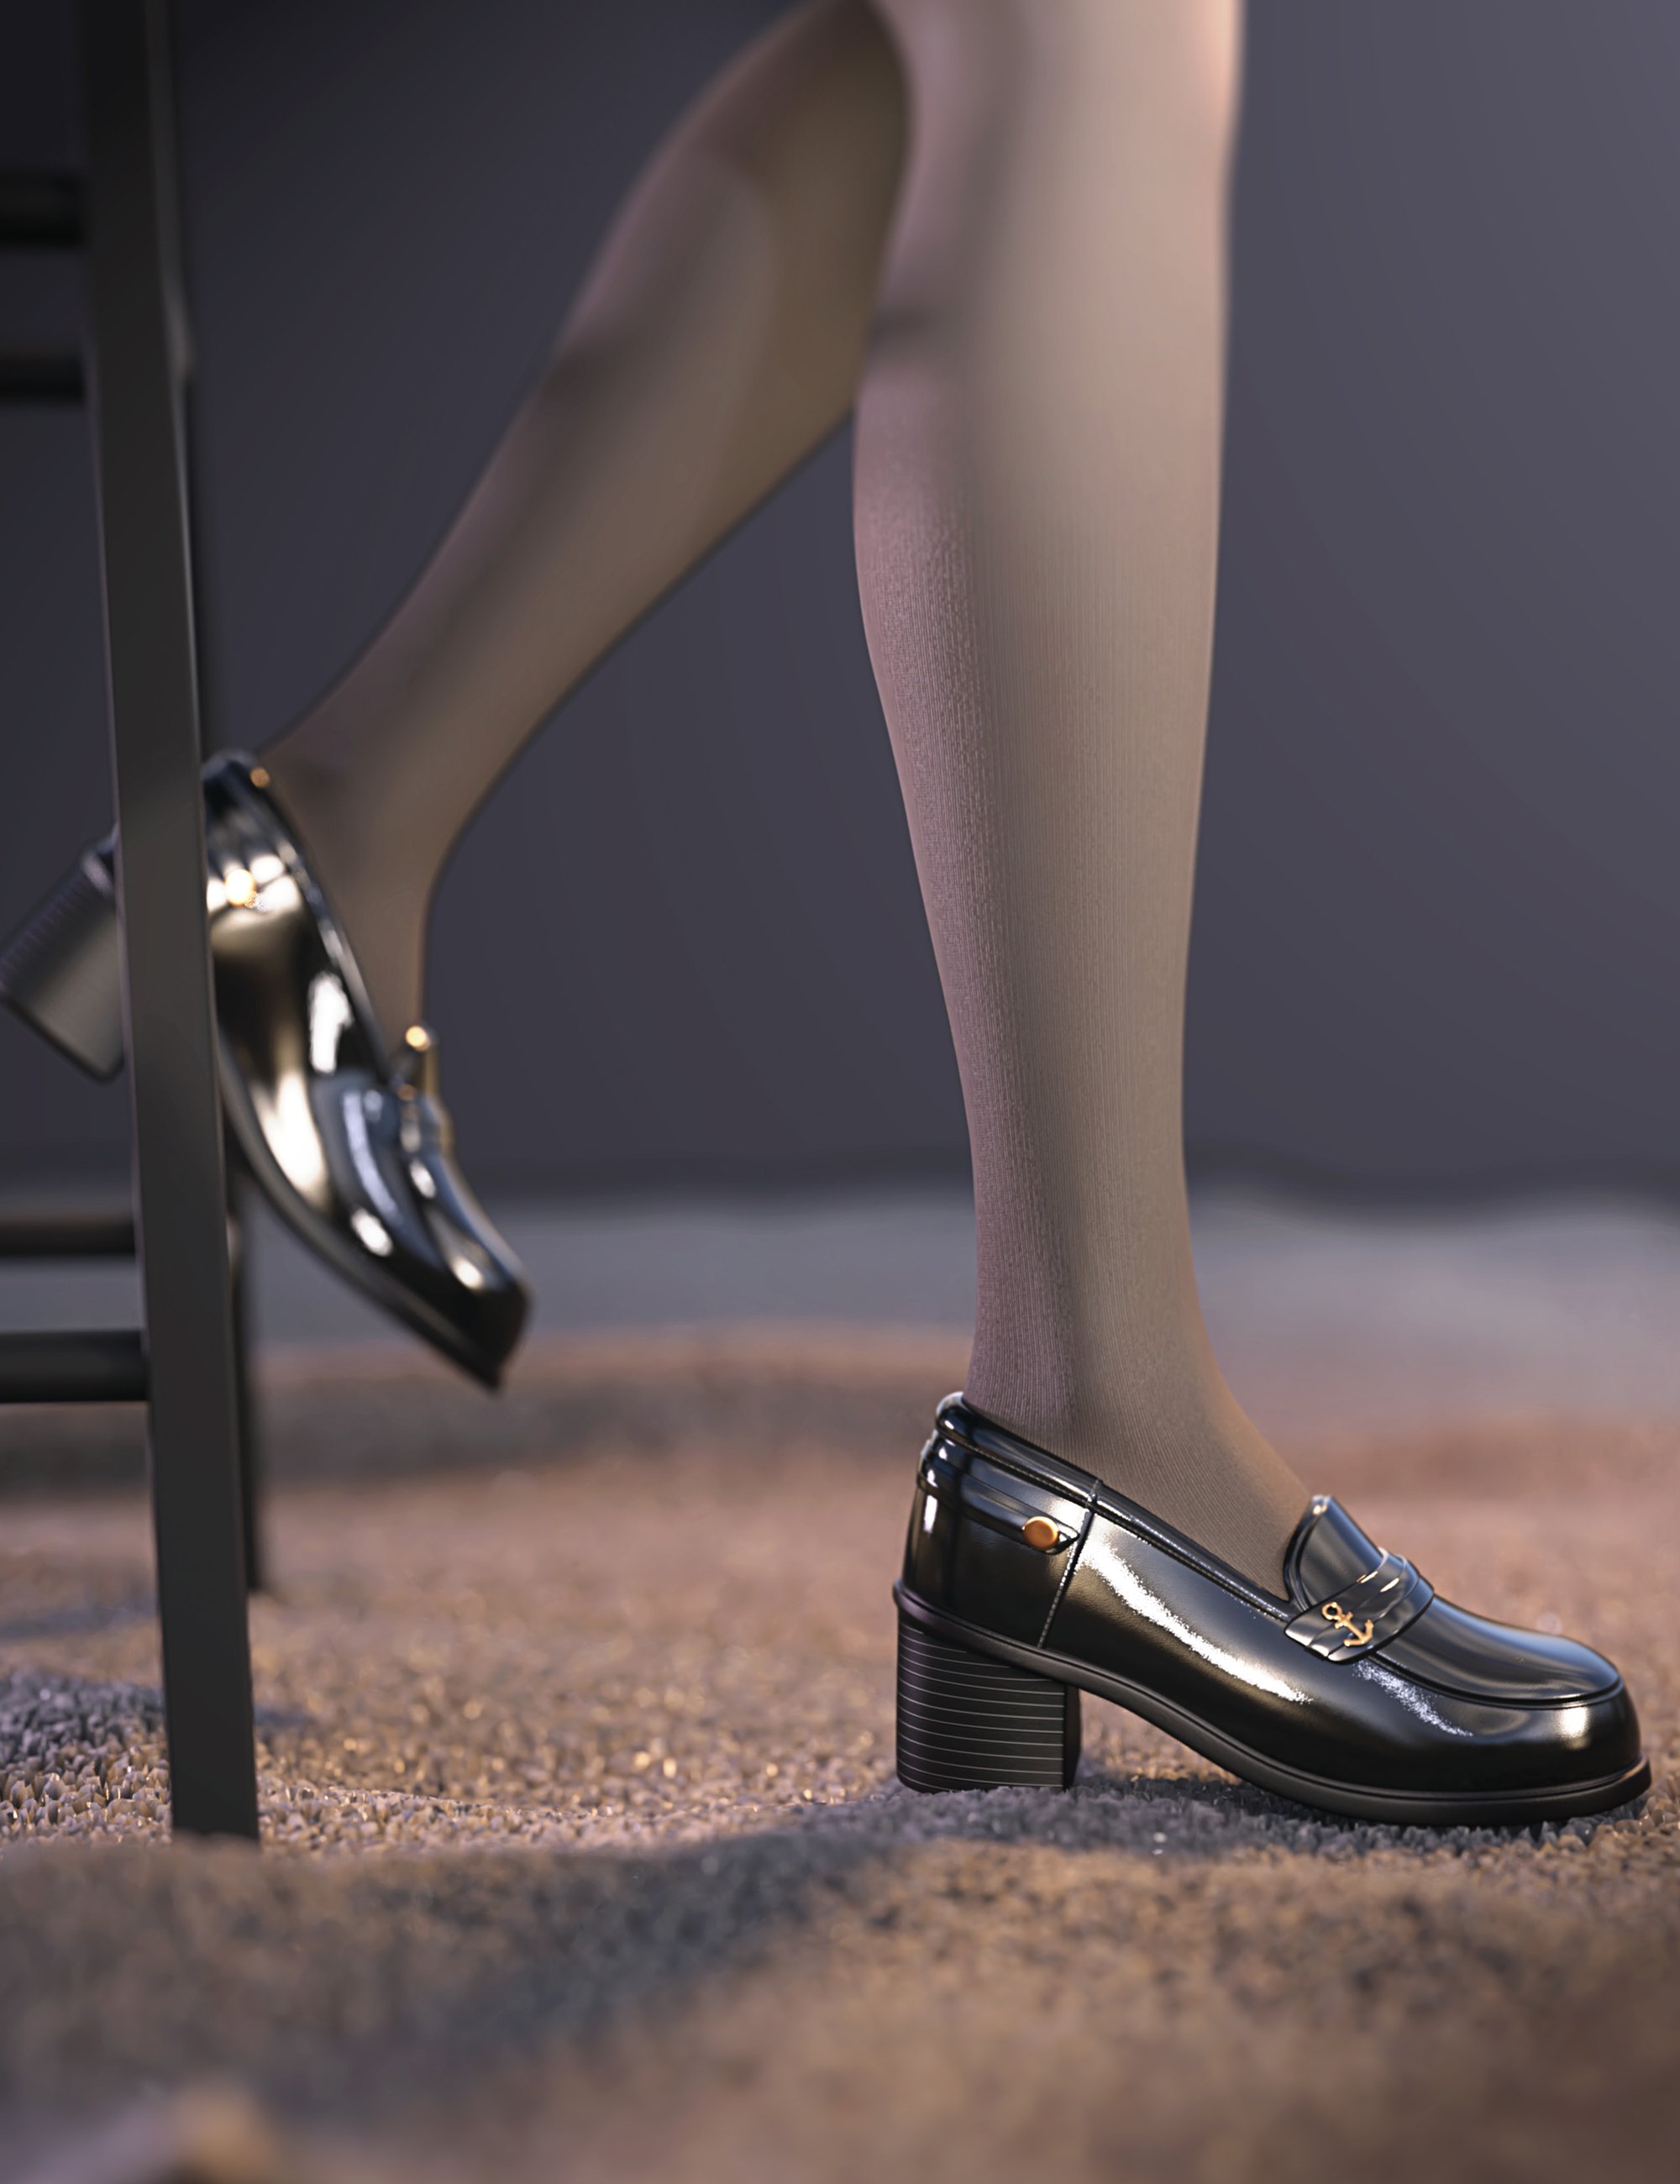 SU Leather Shoes for Genesis 8 and 8.1 Females and Genesis 9 by: Sue Yee, 3D Models by Daz 3D